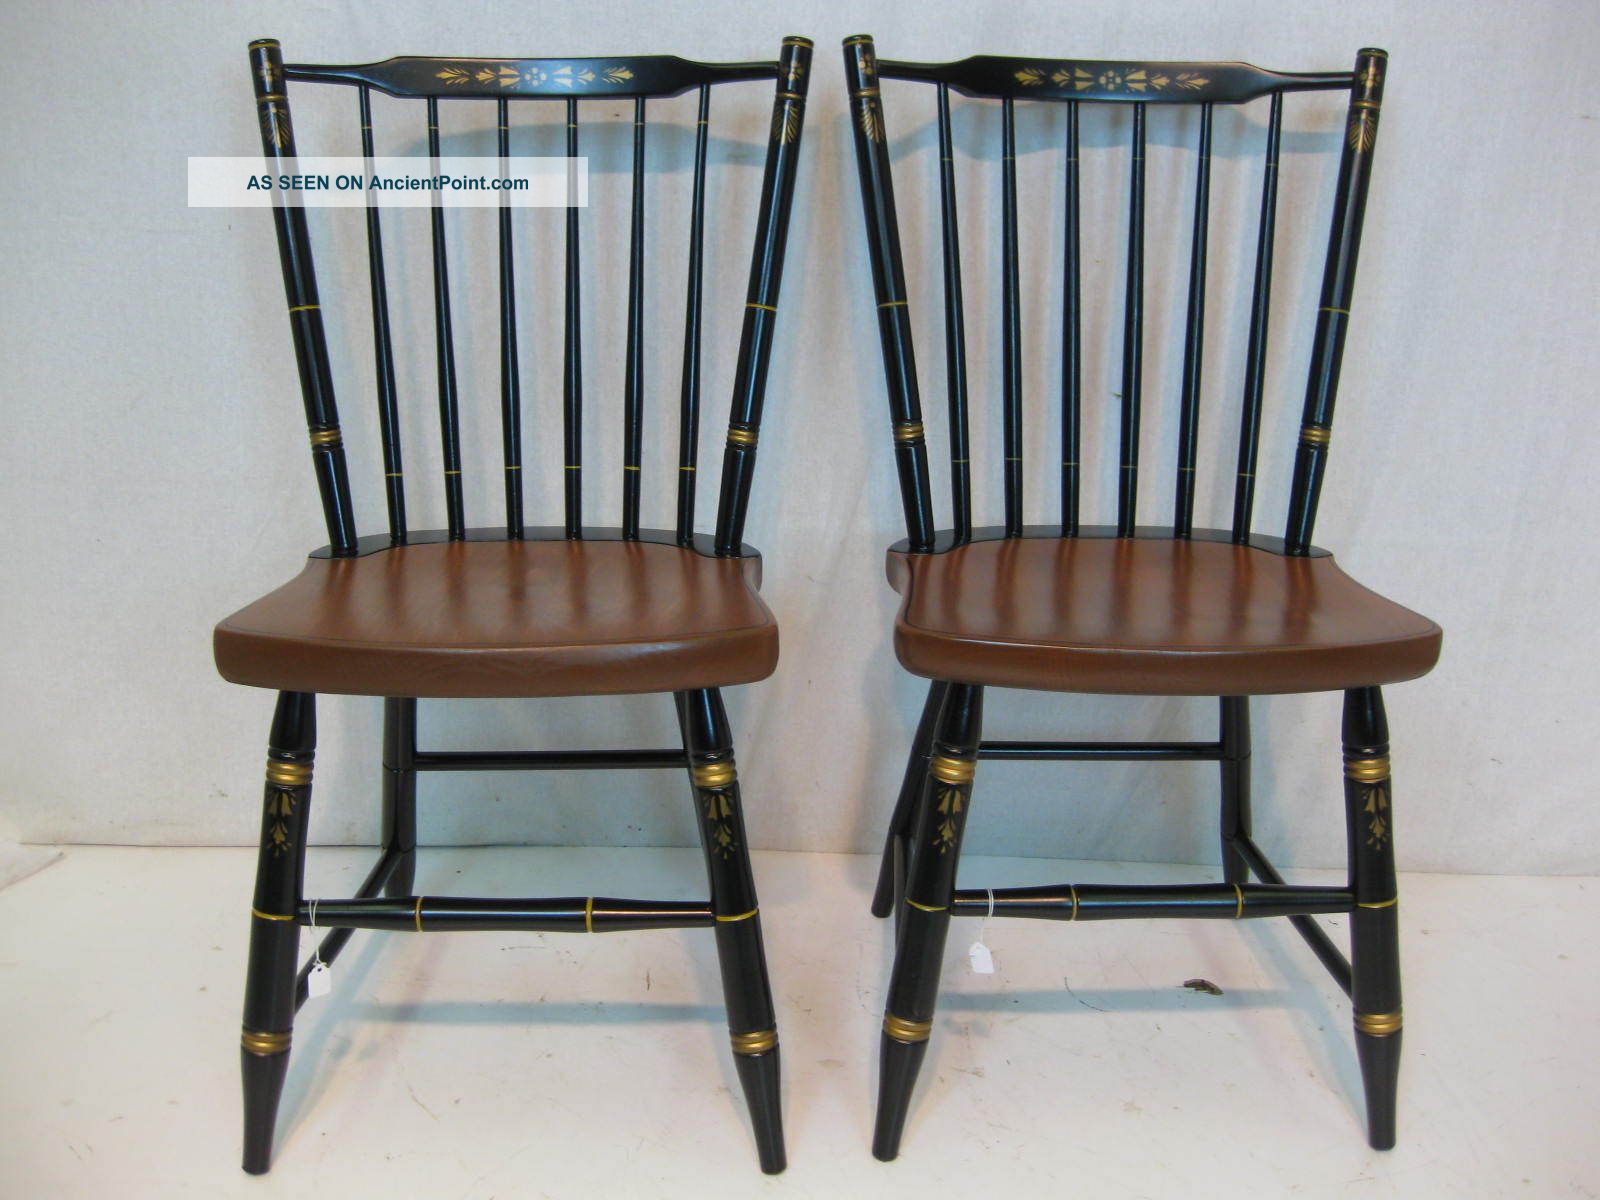 Hitchcock Chair Co Black Harvest Stickback Side Chairs